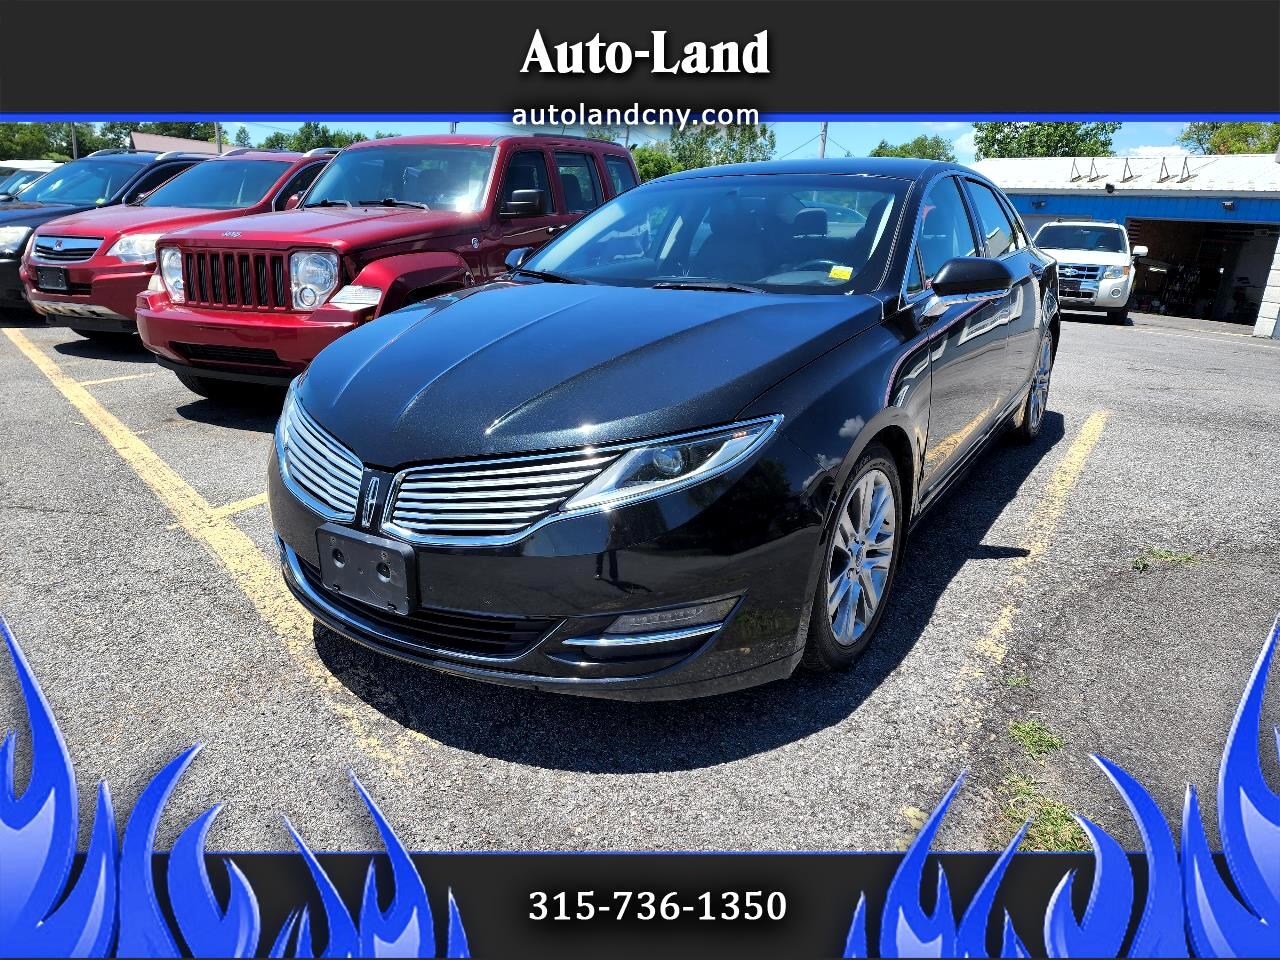 Lincoln MKZ FWD 2013